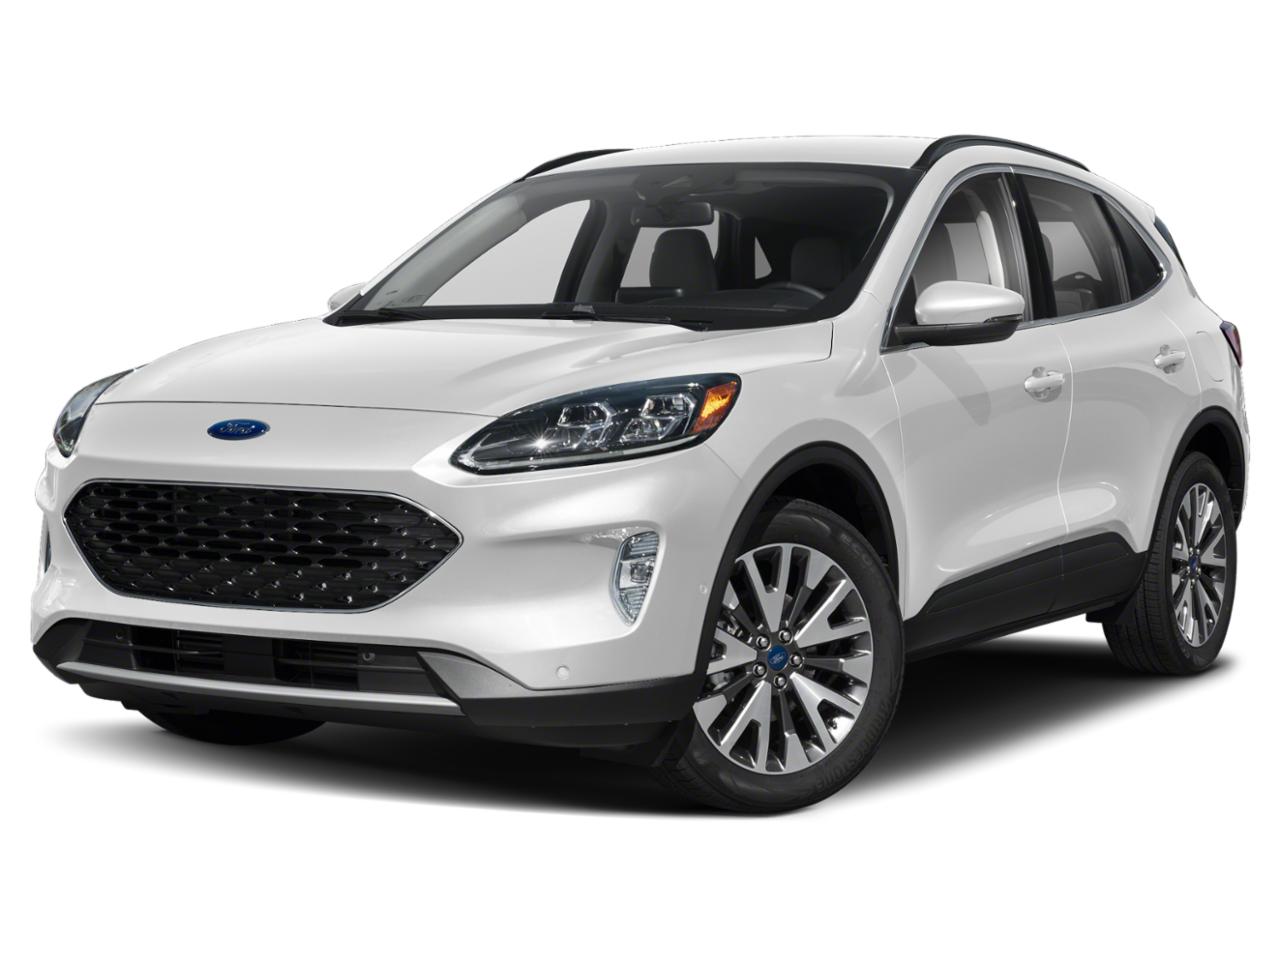 2020 Ford Escape Vehicle Photo in Saint Charles, IL 60174